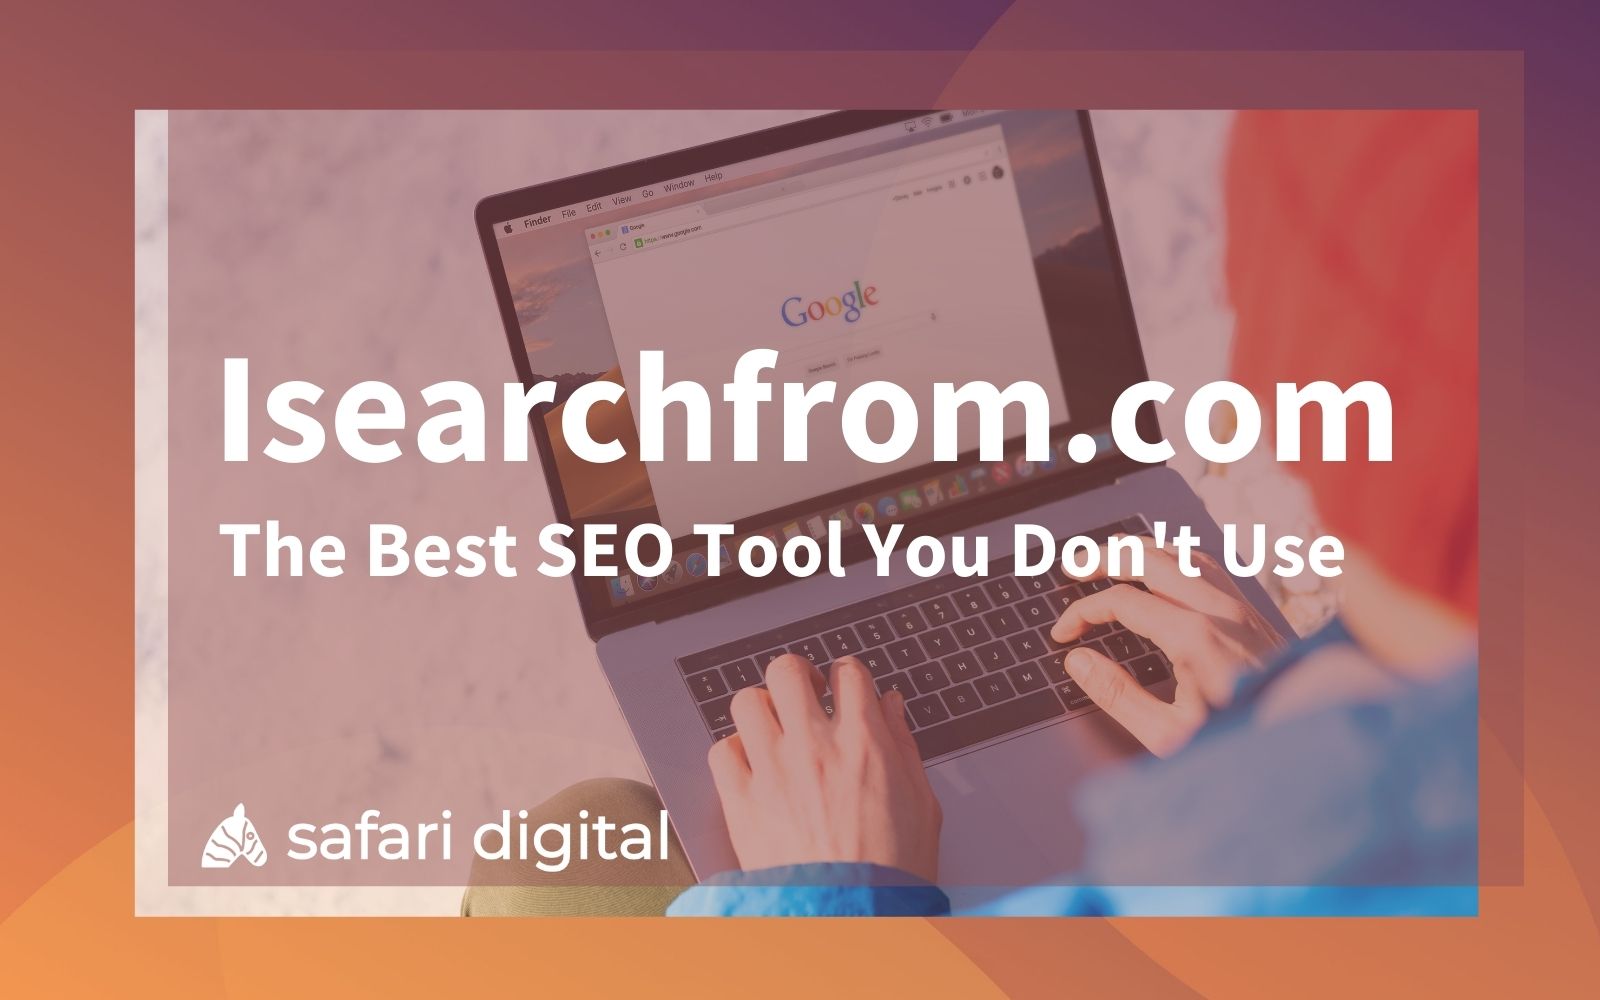 isearchfrom.com SEO tool cover image